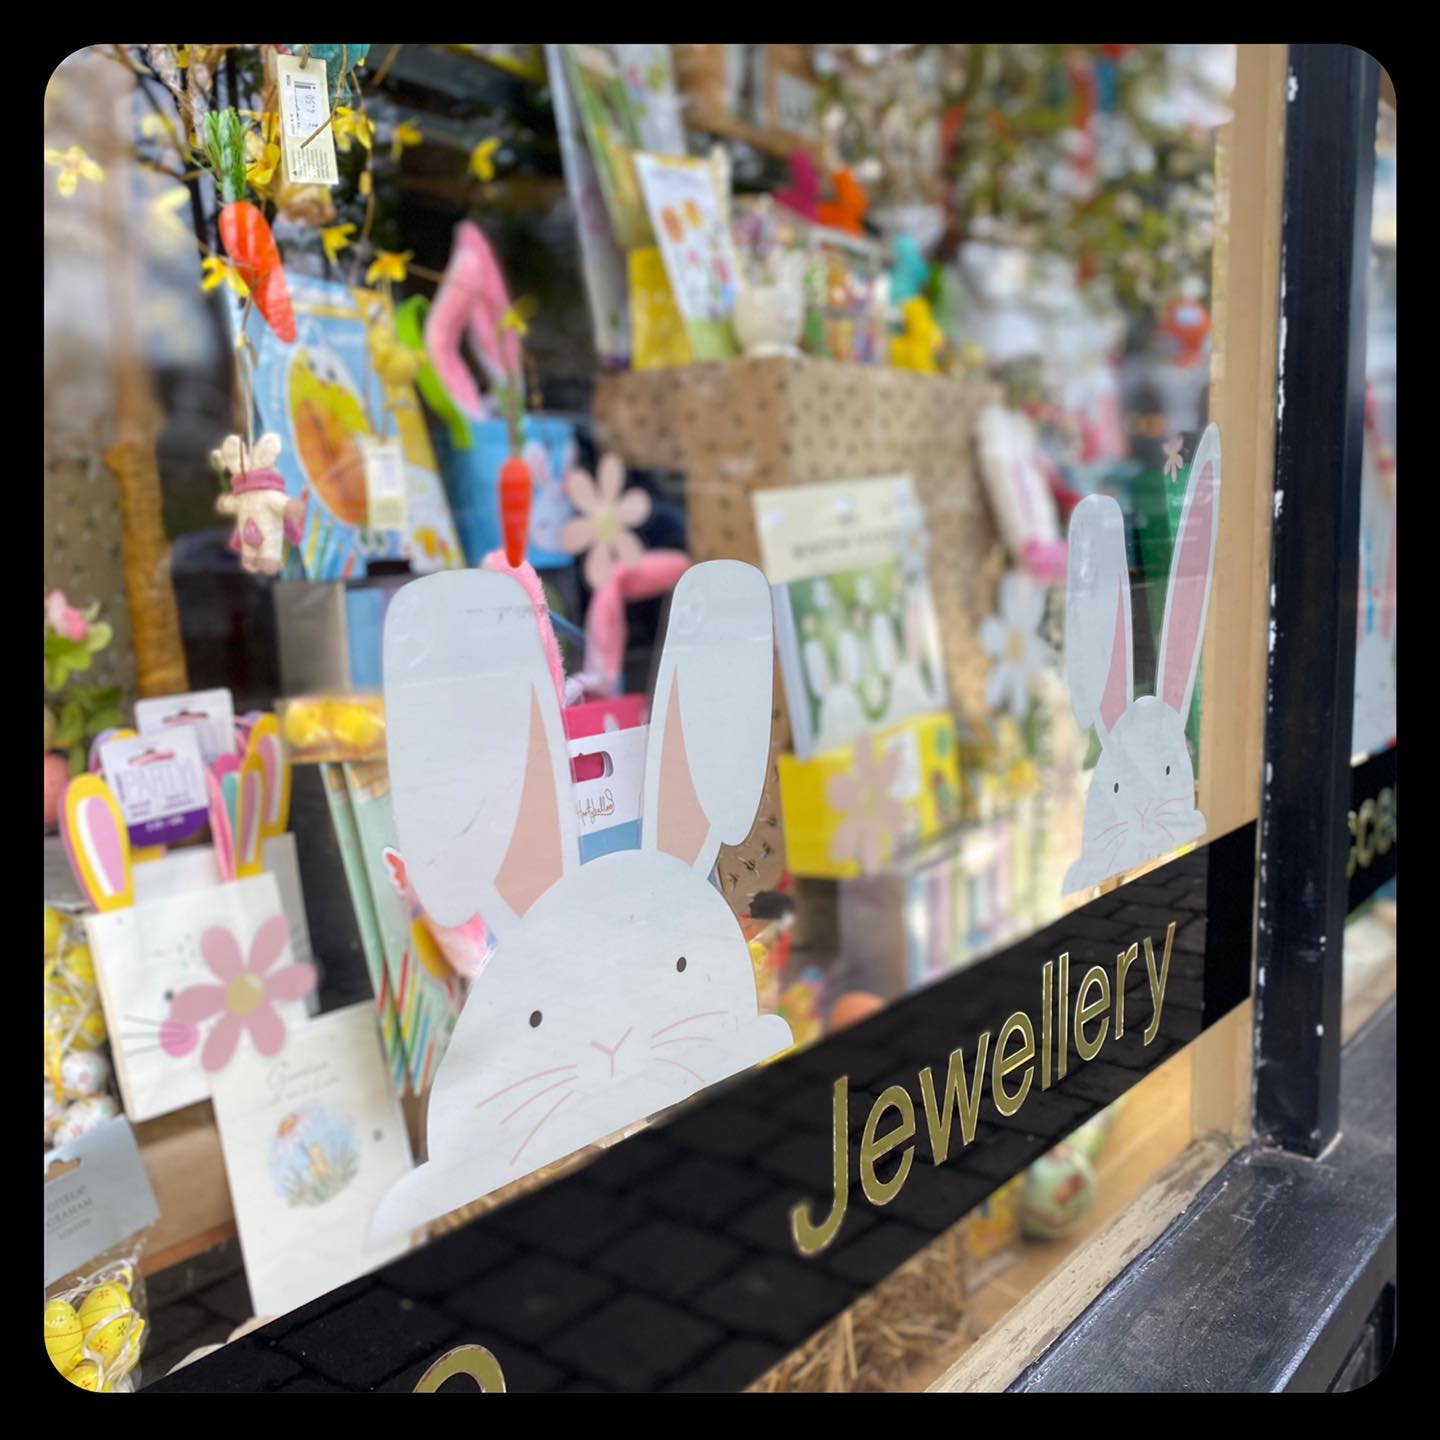 Above: Bouncing bunny – Threads of Harpenden’s detailed window